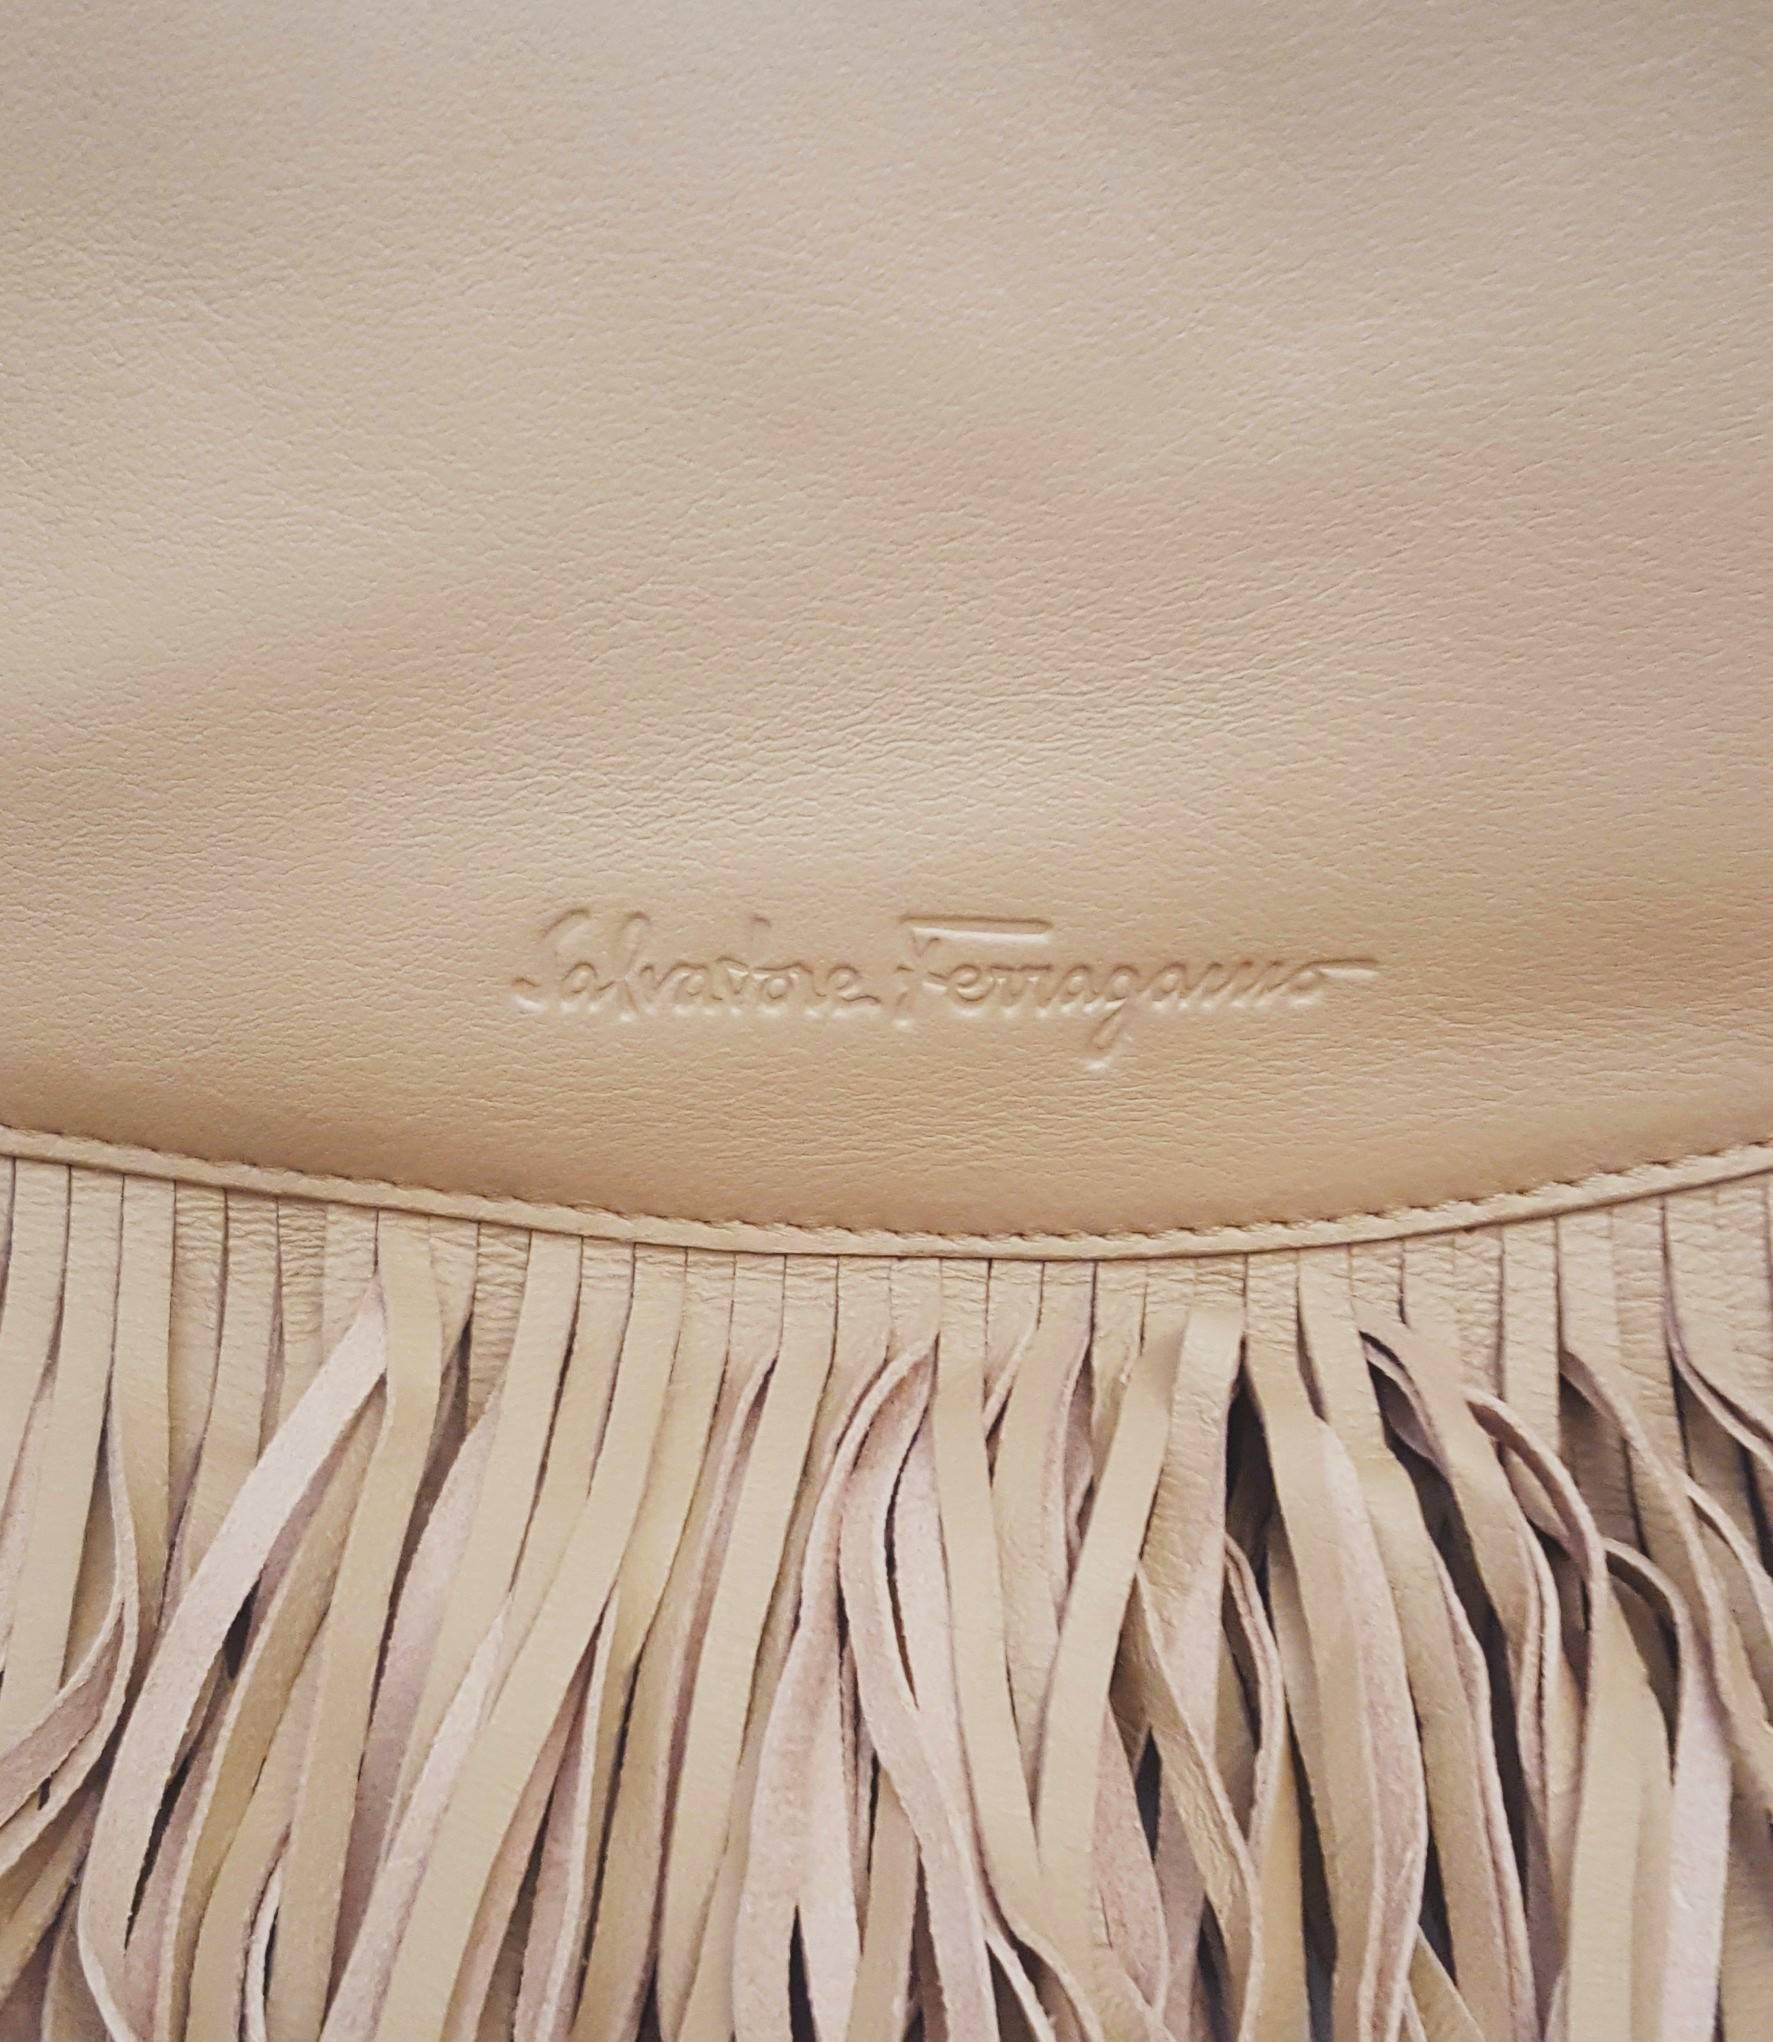 Salvatore Ferragamo tan leather Hobo with long soft leather fringe all around the tote creates a luscious fringe cascade border.  The braided metal chain and leather details are throughout the shoulder strap/handle and body of the bag. This bag is